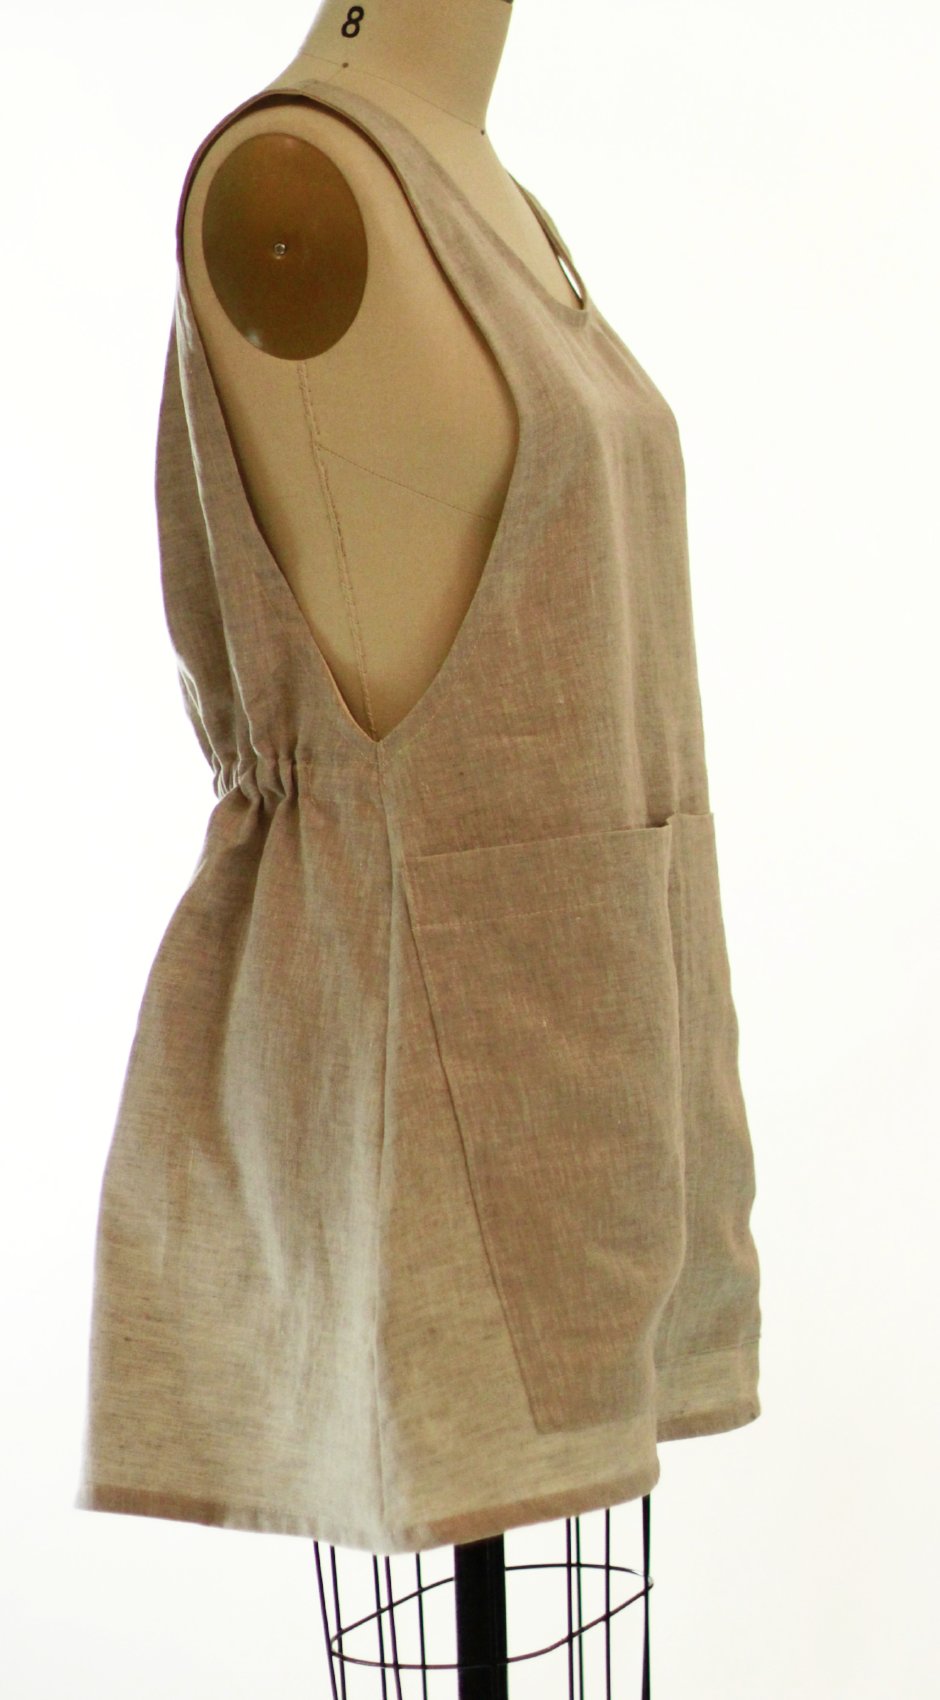 XS-5X Smock #2 in Flax Linen